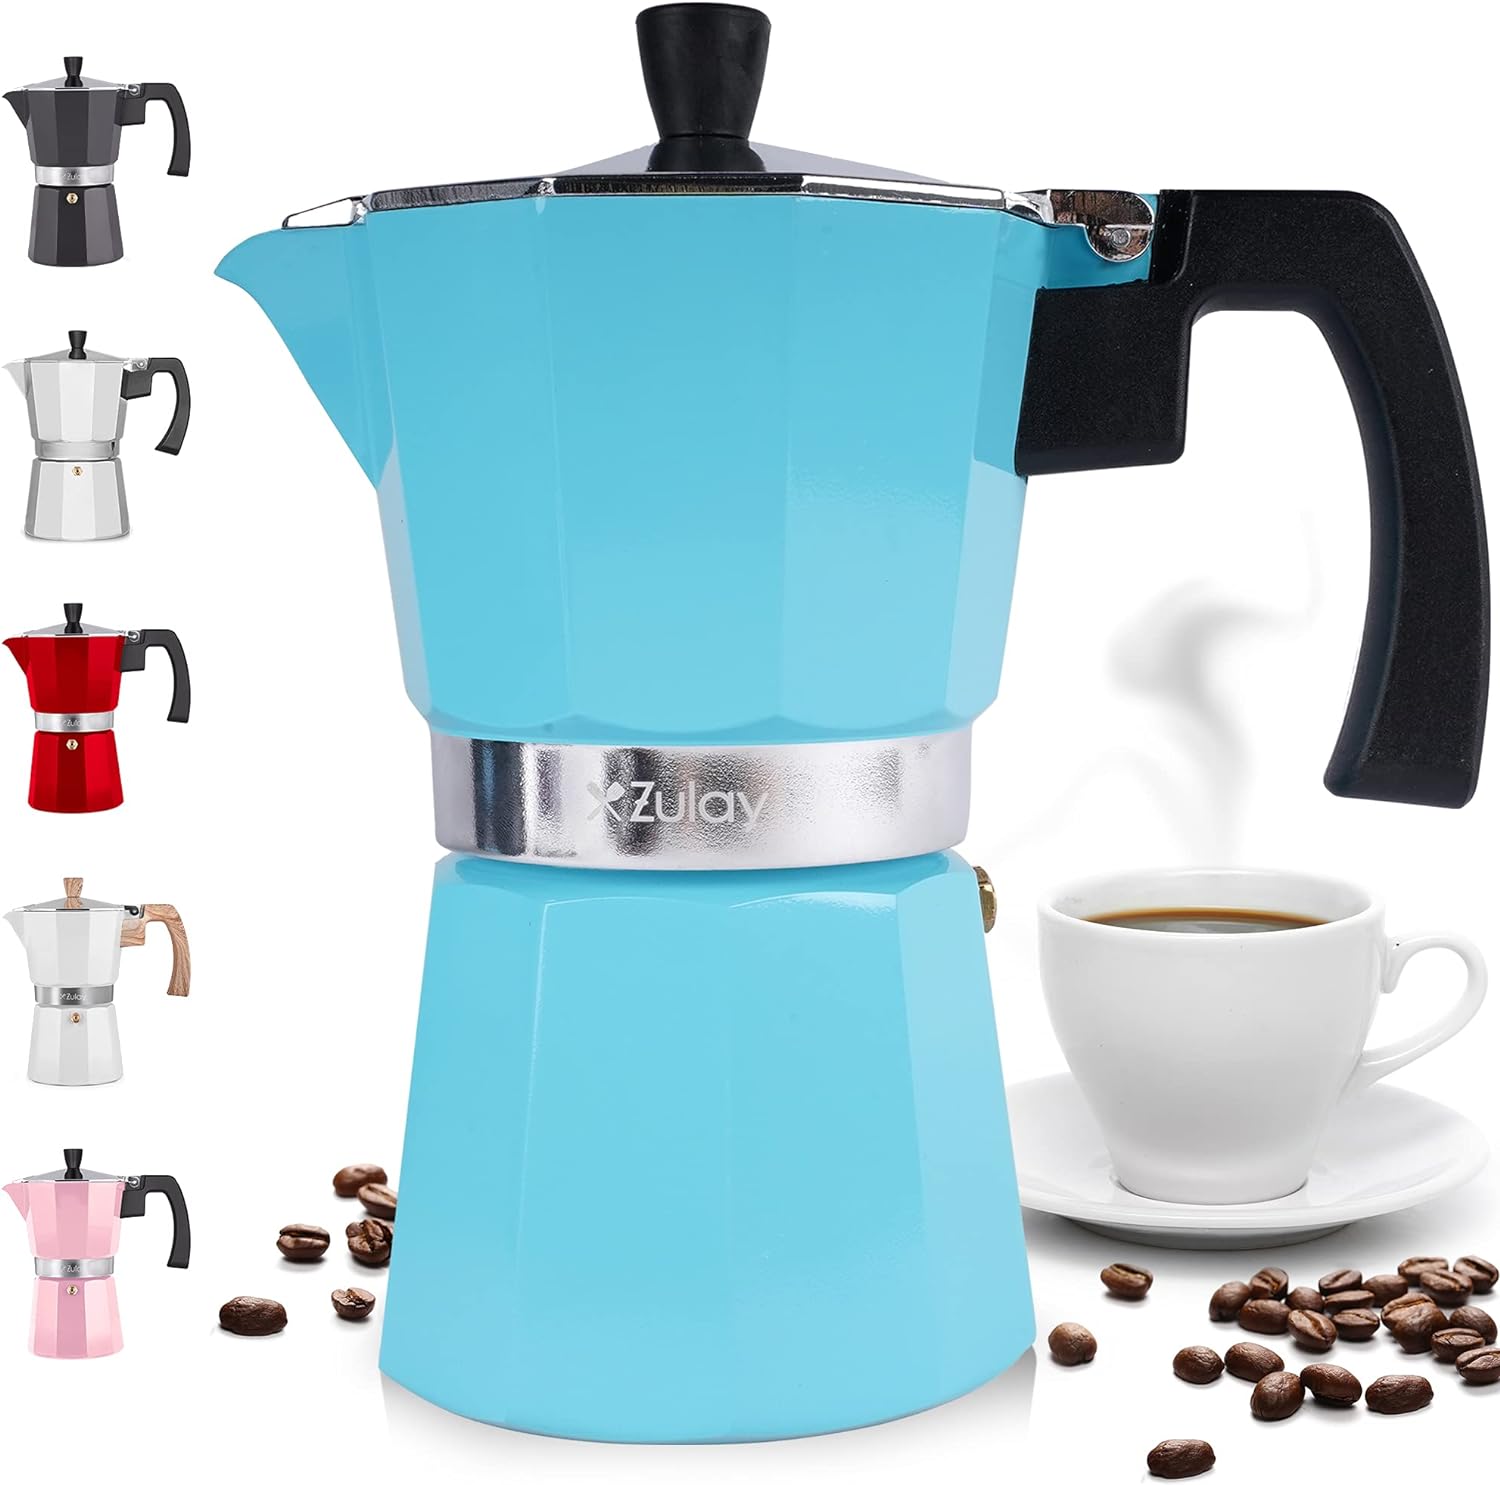 Zulay Classic Stovetop Espresso Maker for Great Flavored Strong Espresso, Classic Italian Style 3 Espresso Cup Moka Pot, Makes Delicious Coffee, Easy to Operate  Quick Cleanup Pot (Blue/Black)